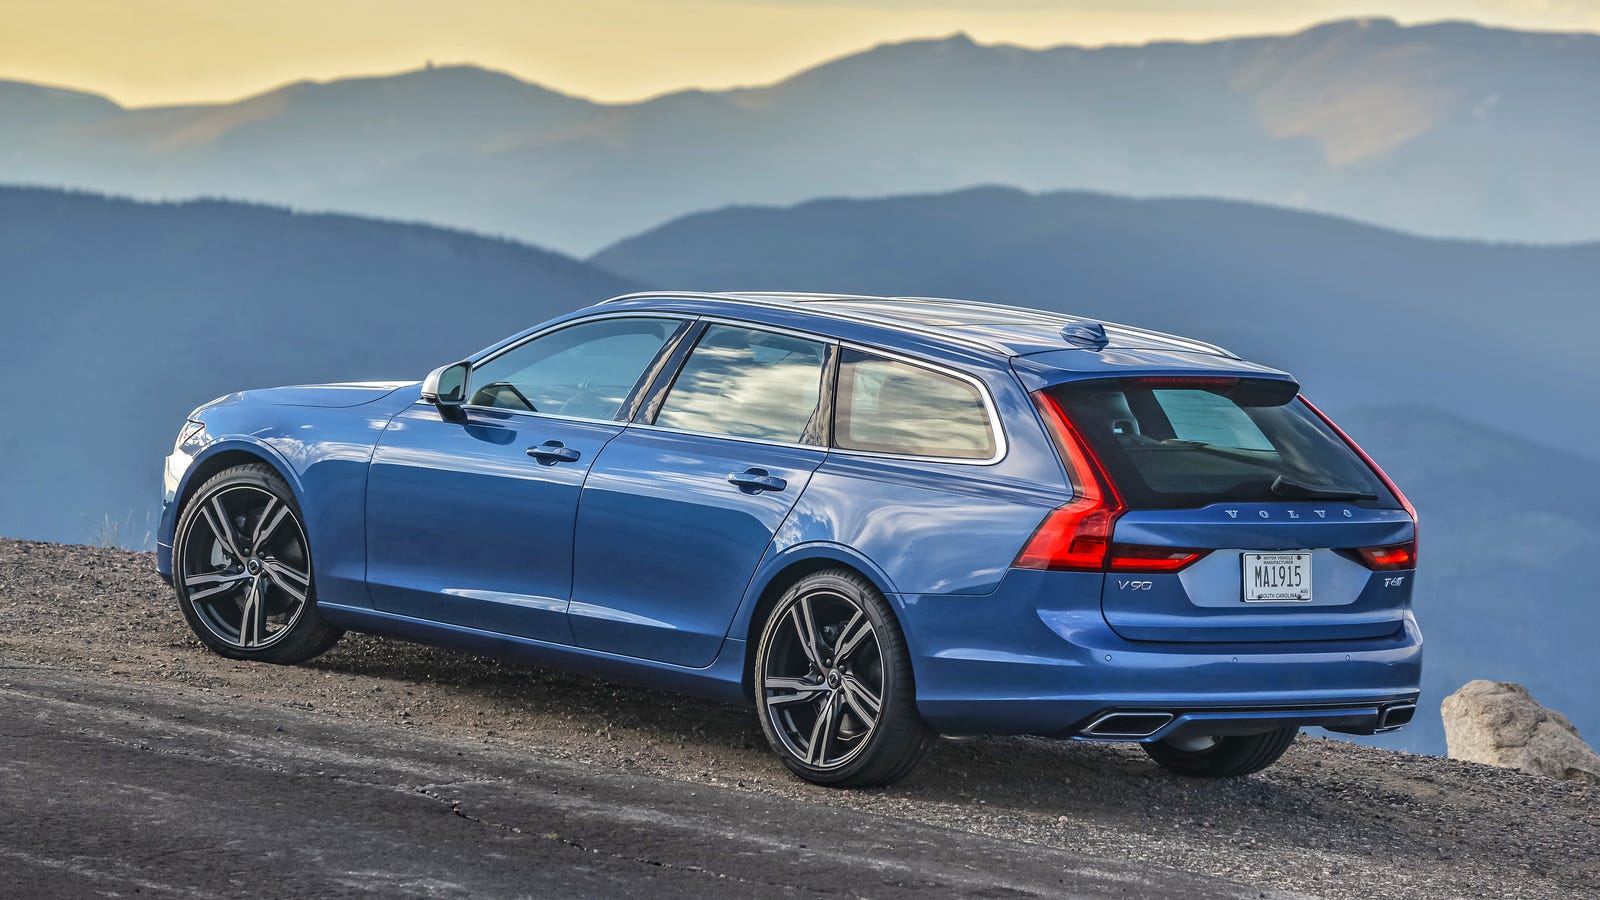 What Kind Of Car Company Does Volvo Want To Be?